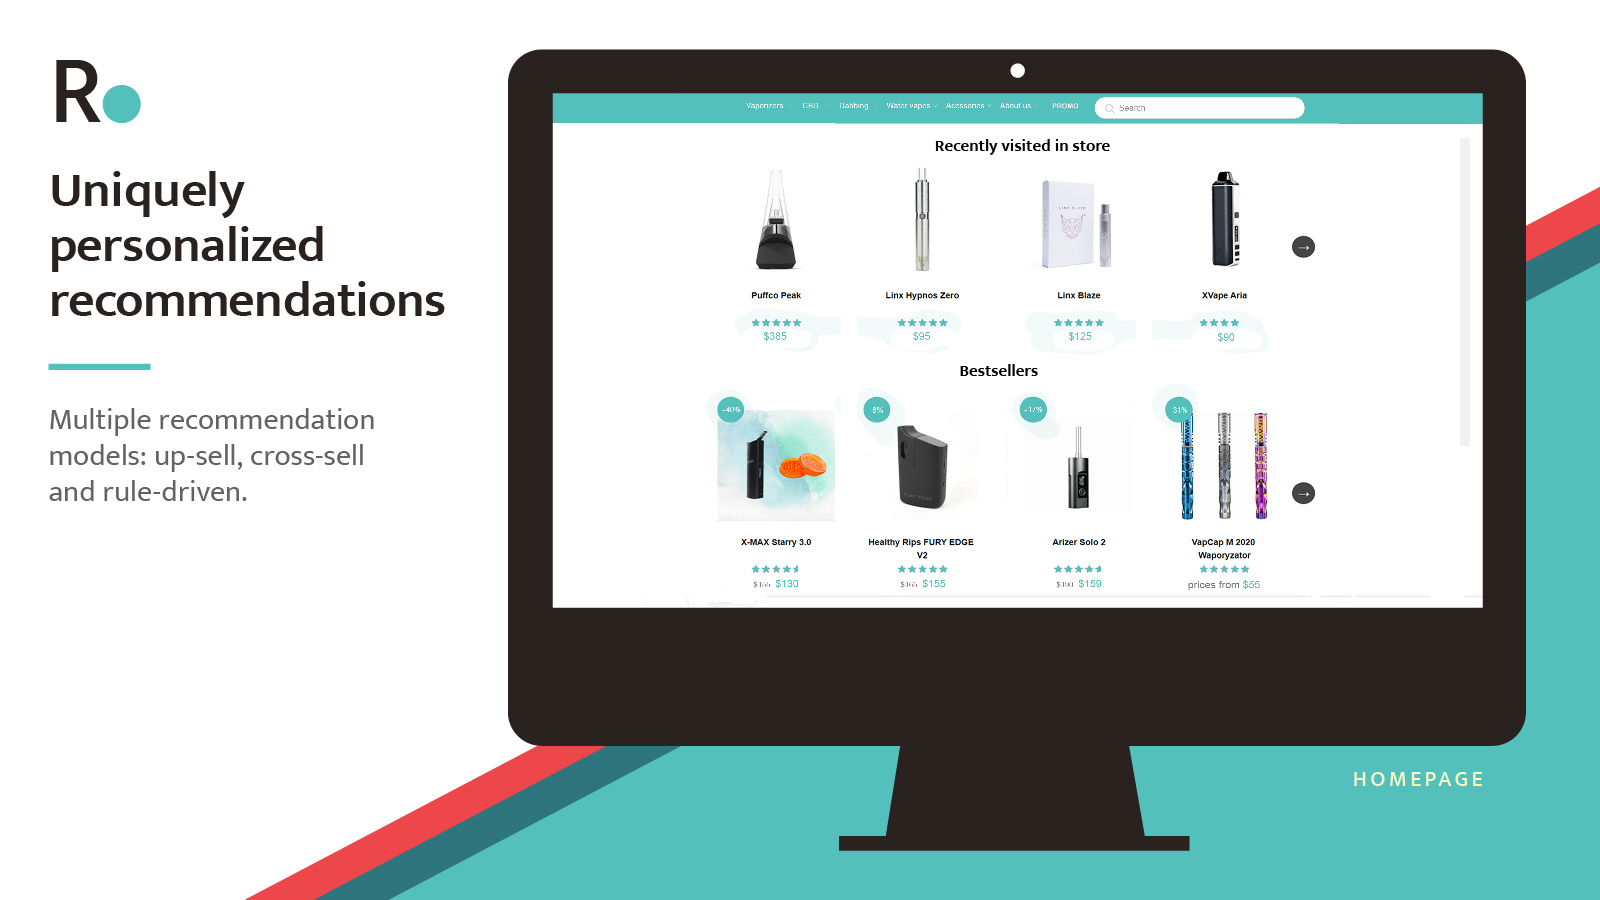 Uniquely personalized product recommendations for every user